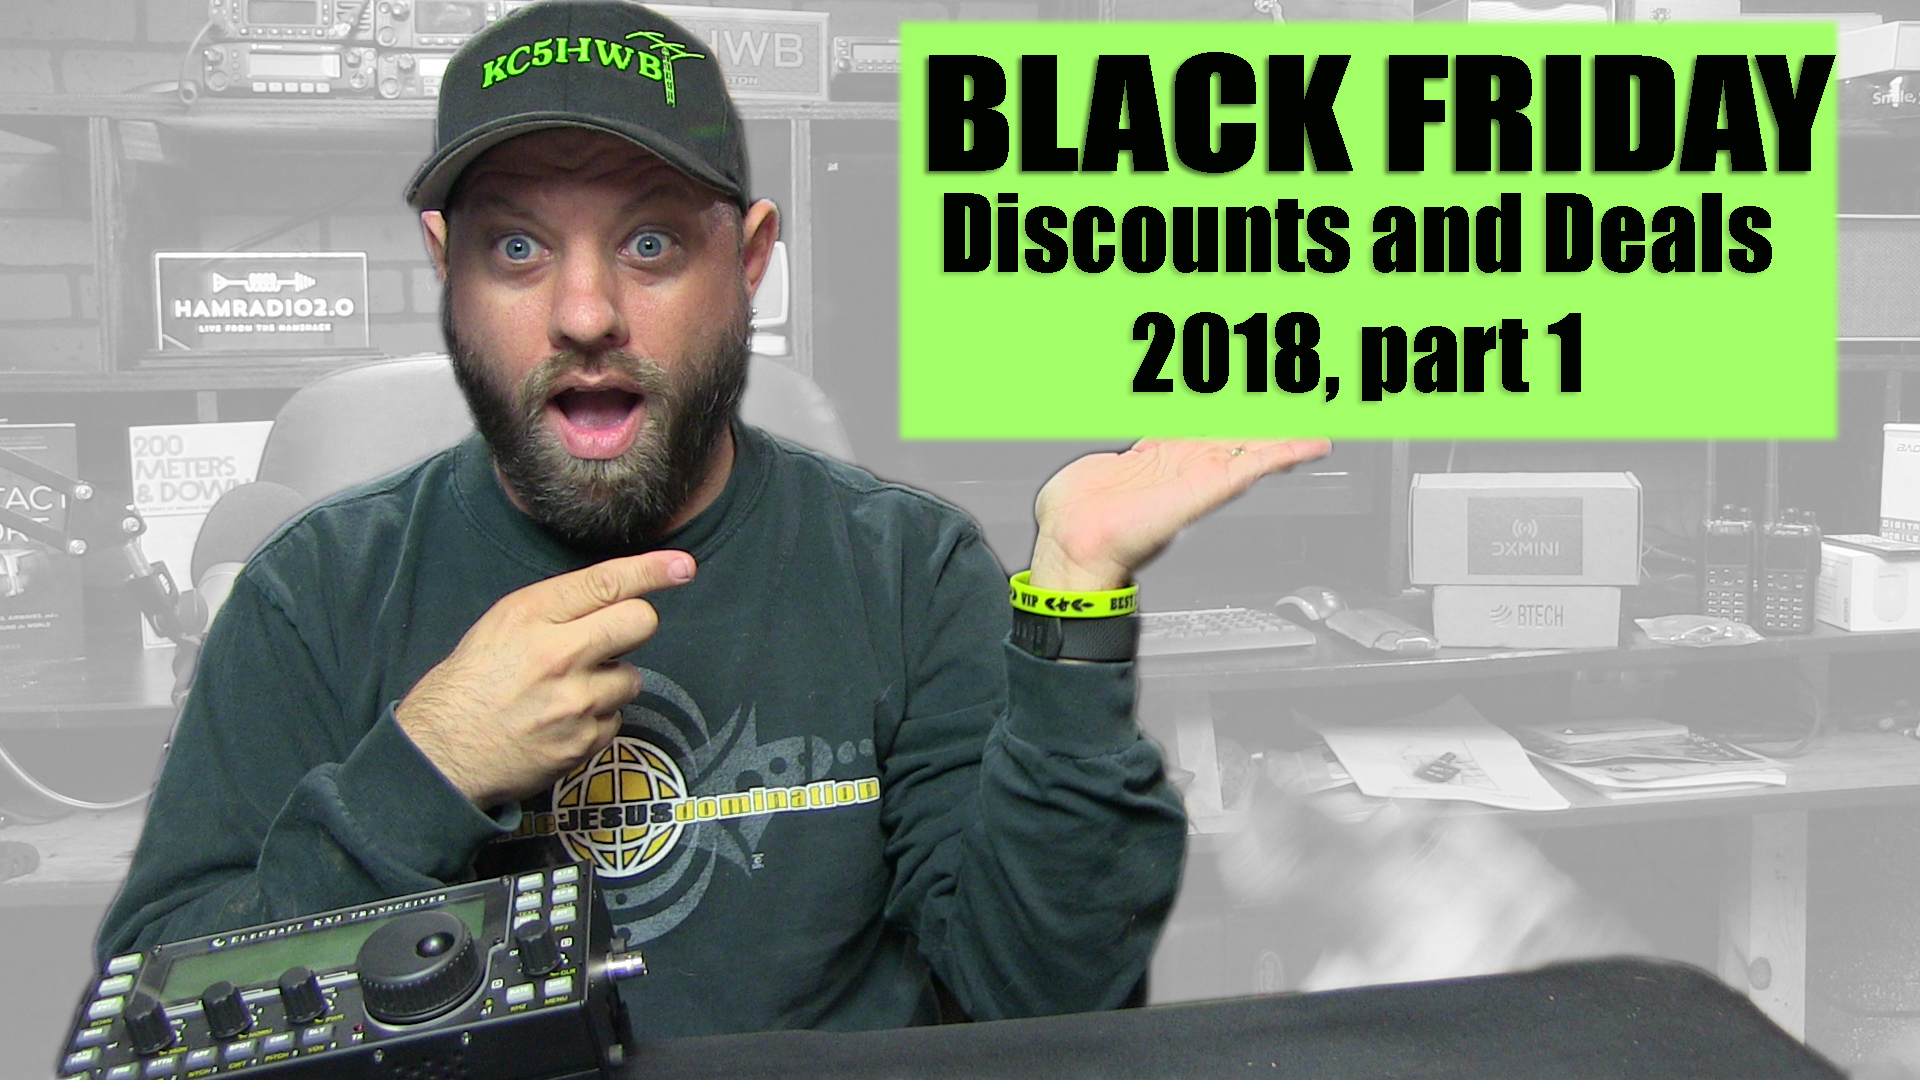 Episode 164: Black Friday Specials for 2018, Part 1